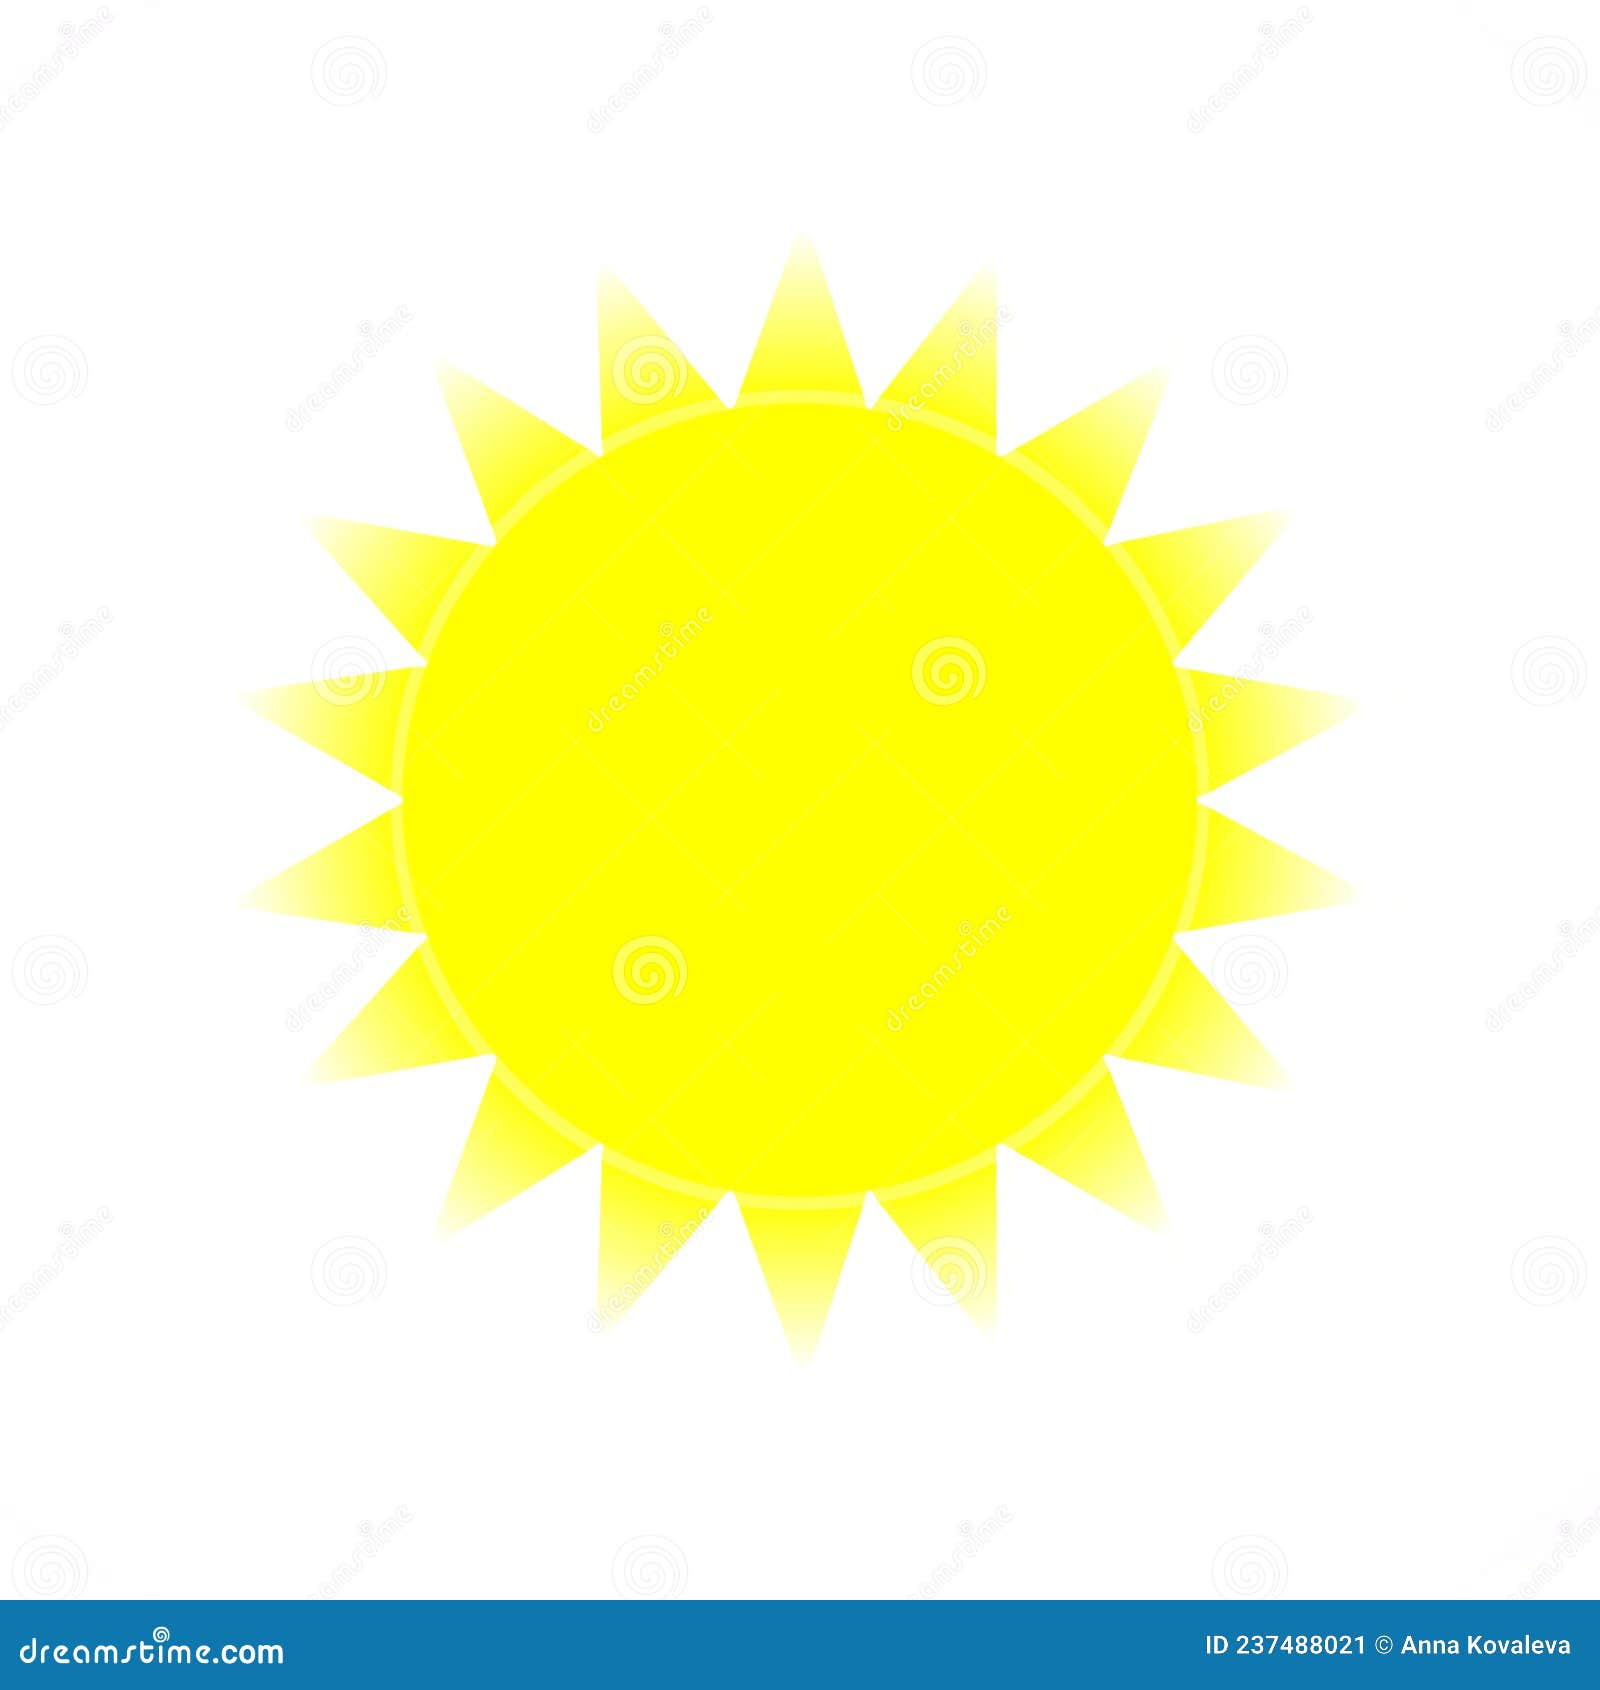 Abstract Illustration of the Sun. Schematic Representation of the Sun ...